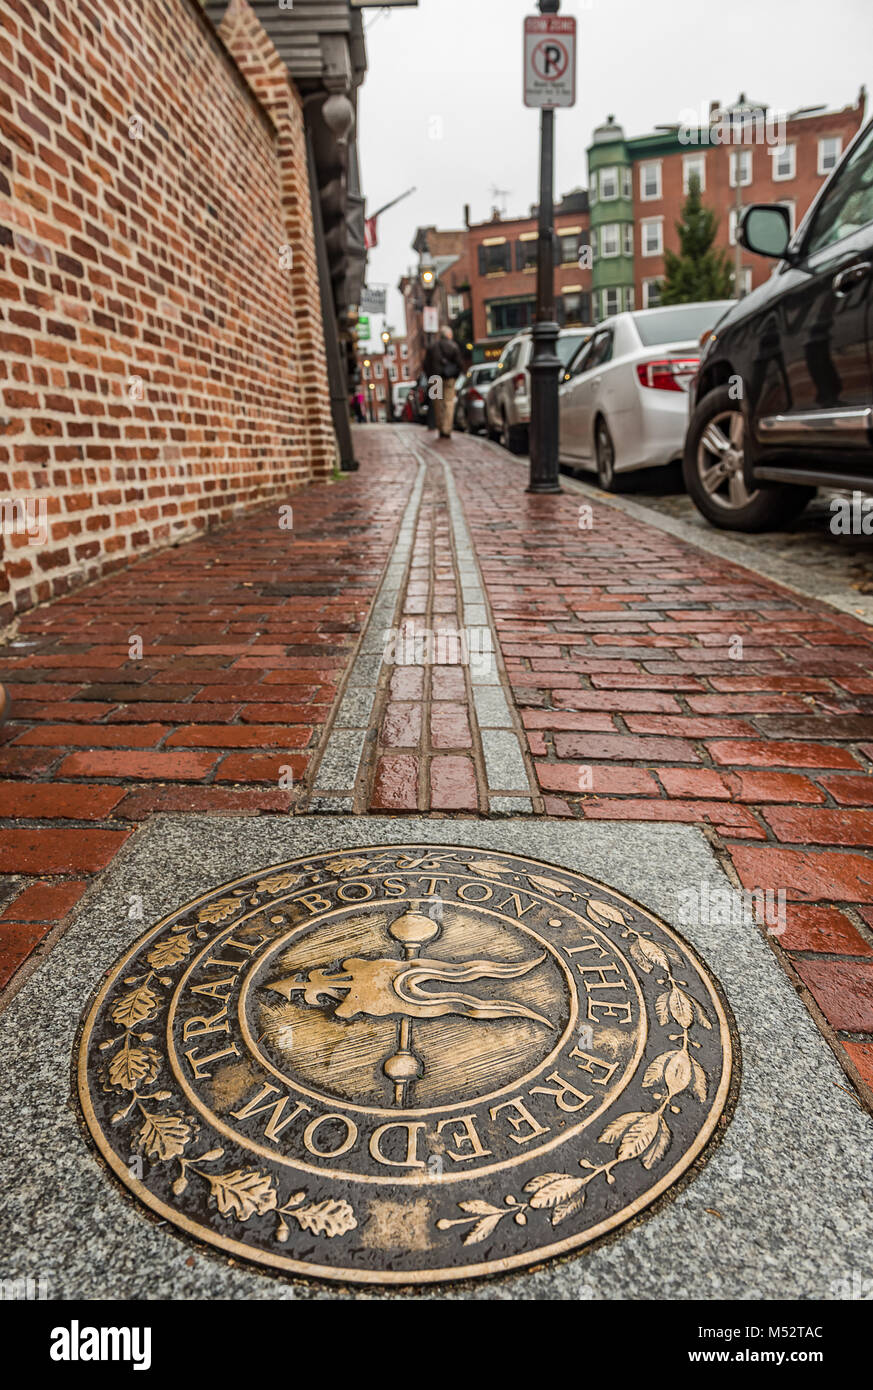 The Freedom Trail is a 2.5-mile-long path through downtown Boston, Massachusetts, that passes by 16 locations significant US history. Stock Photo